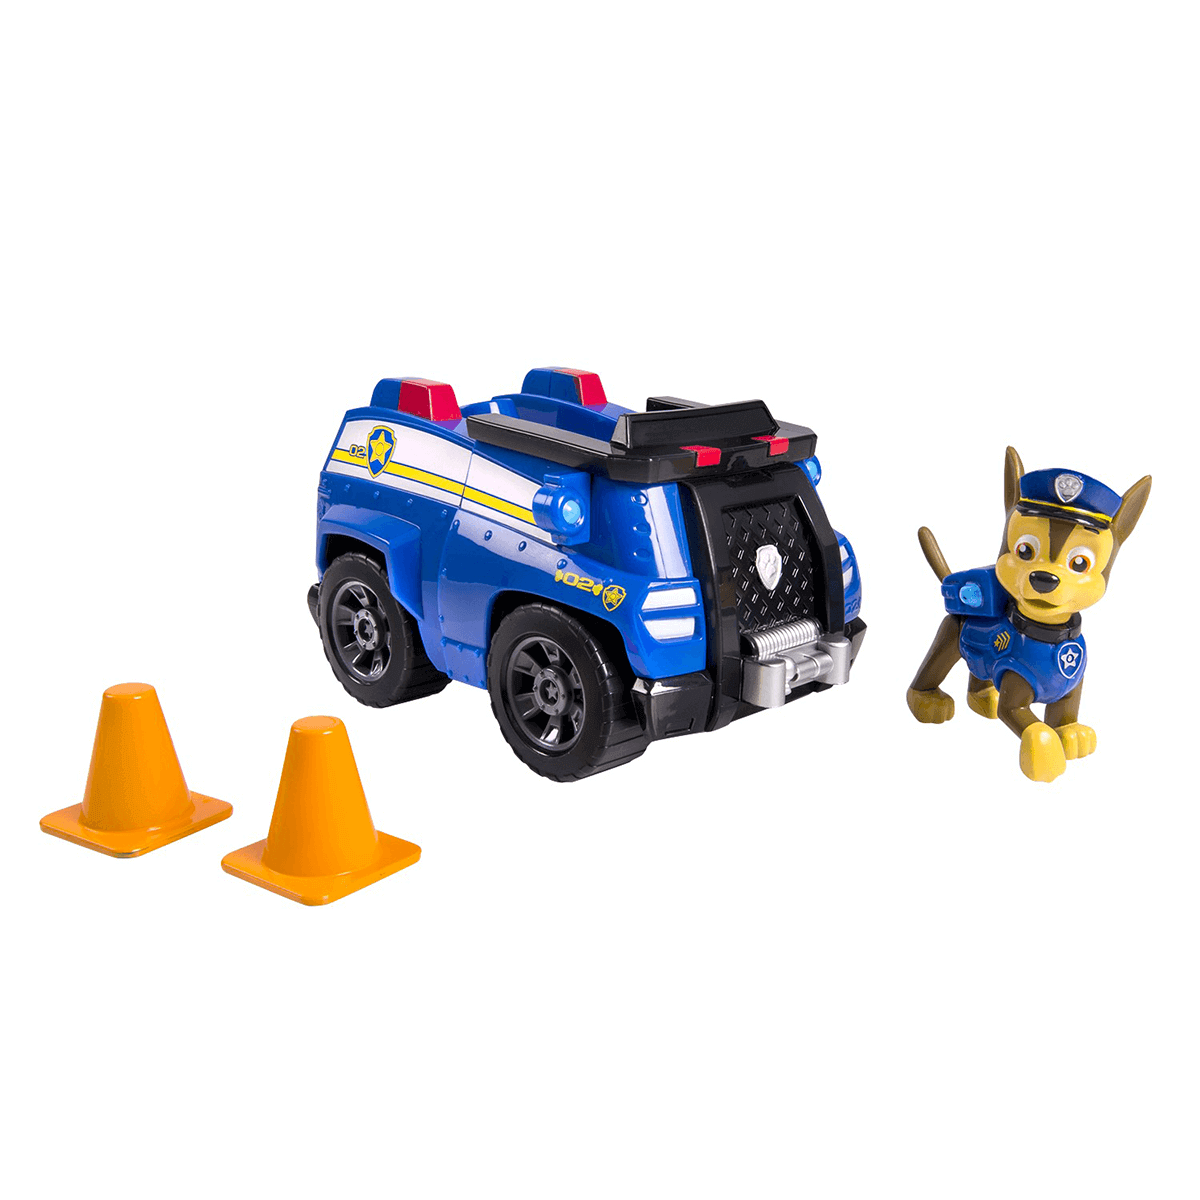  Paw Patrol Swat Car with Chase